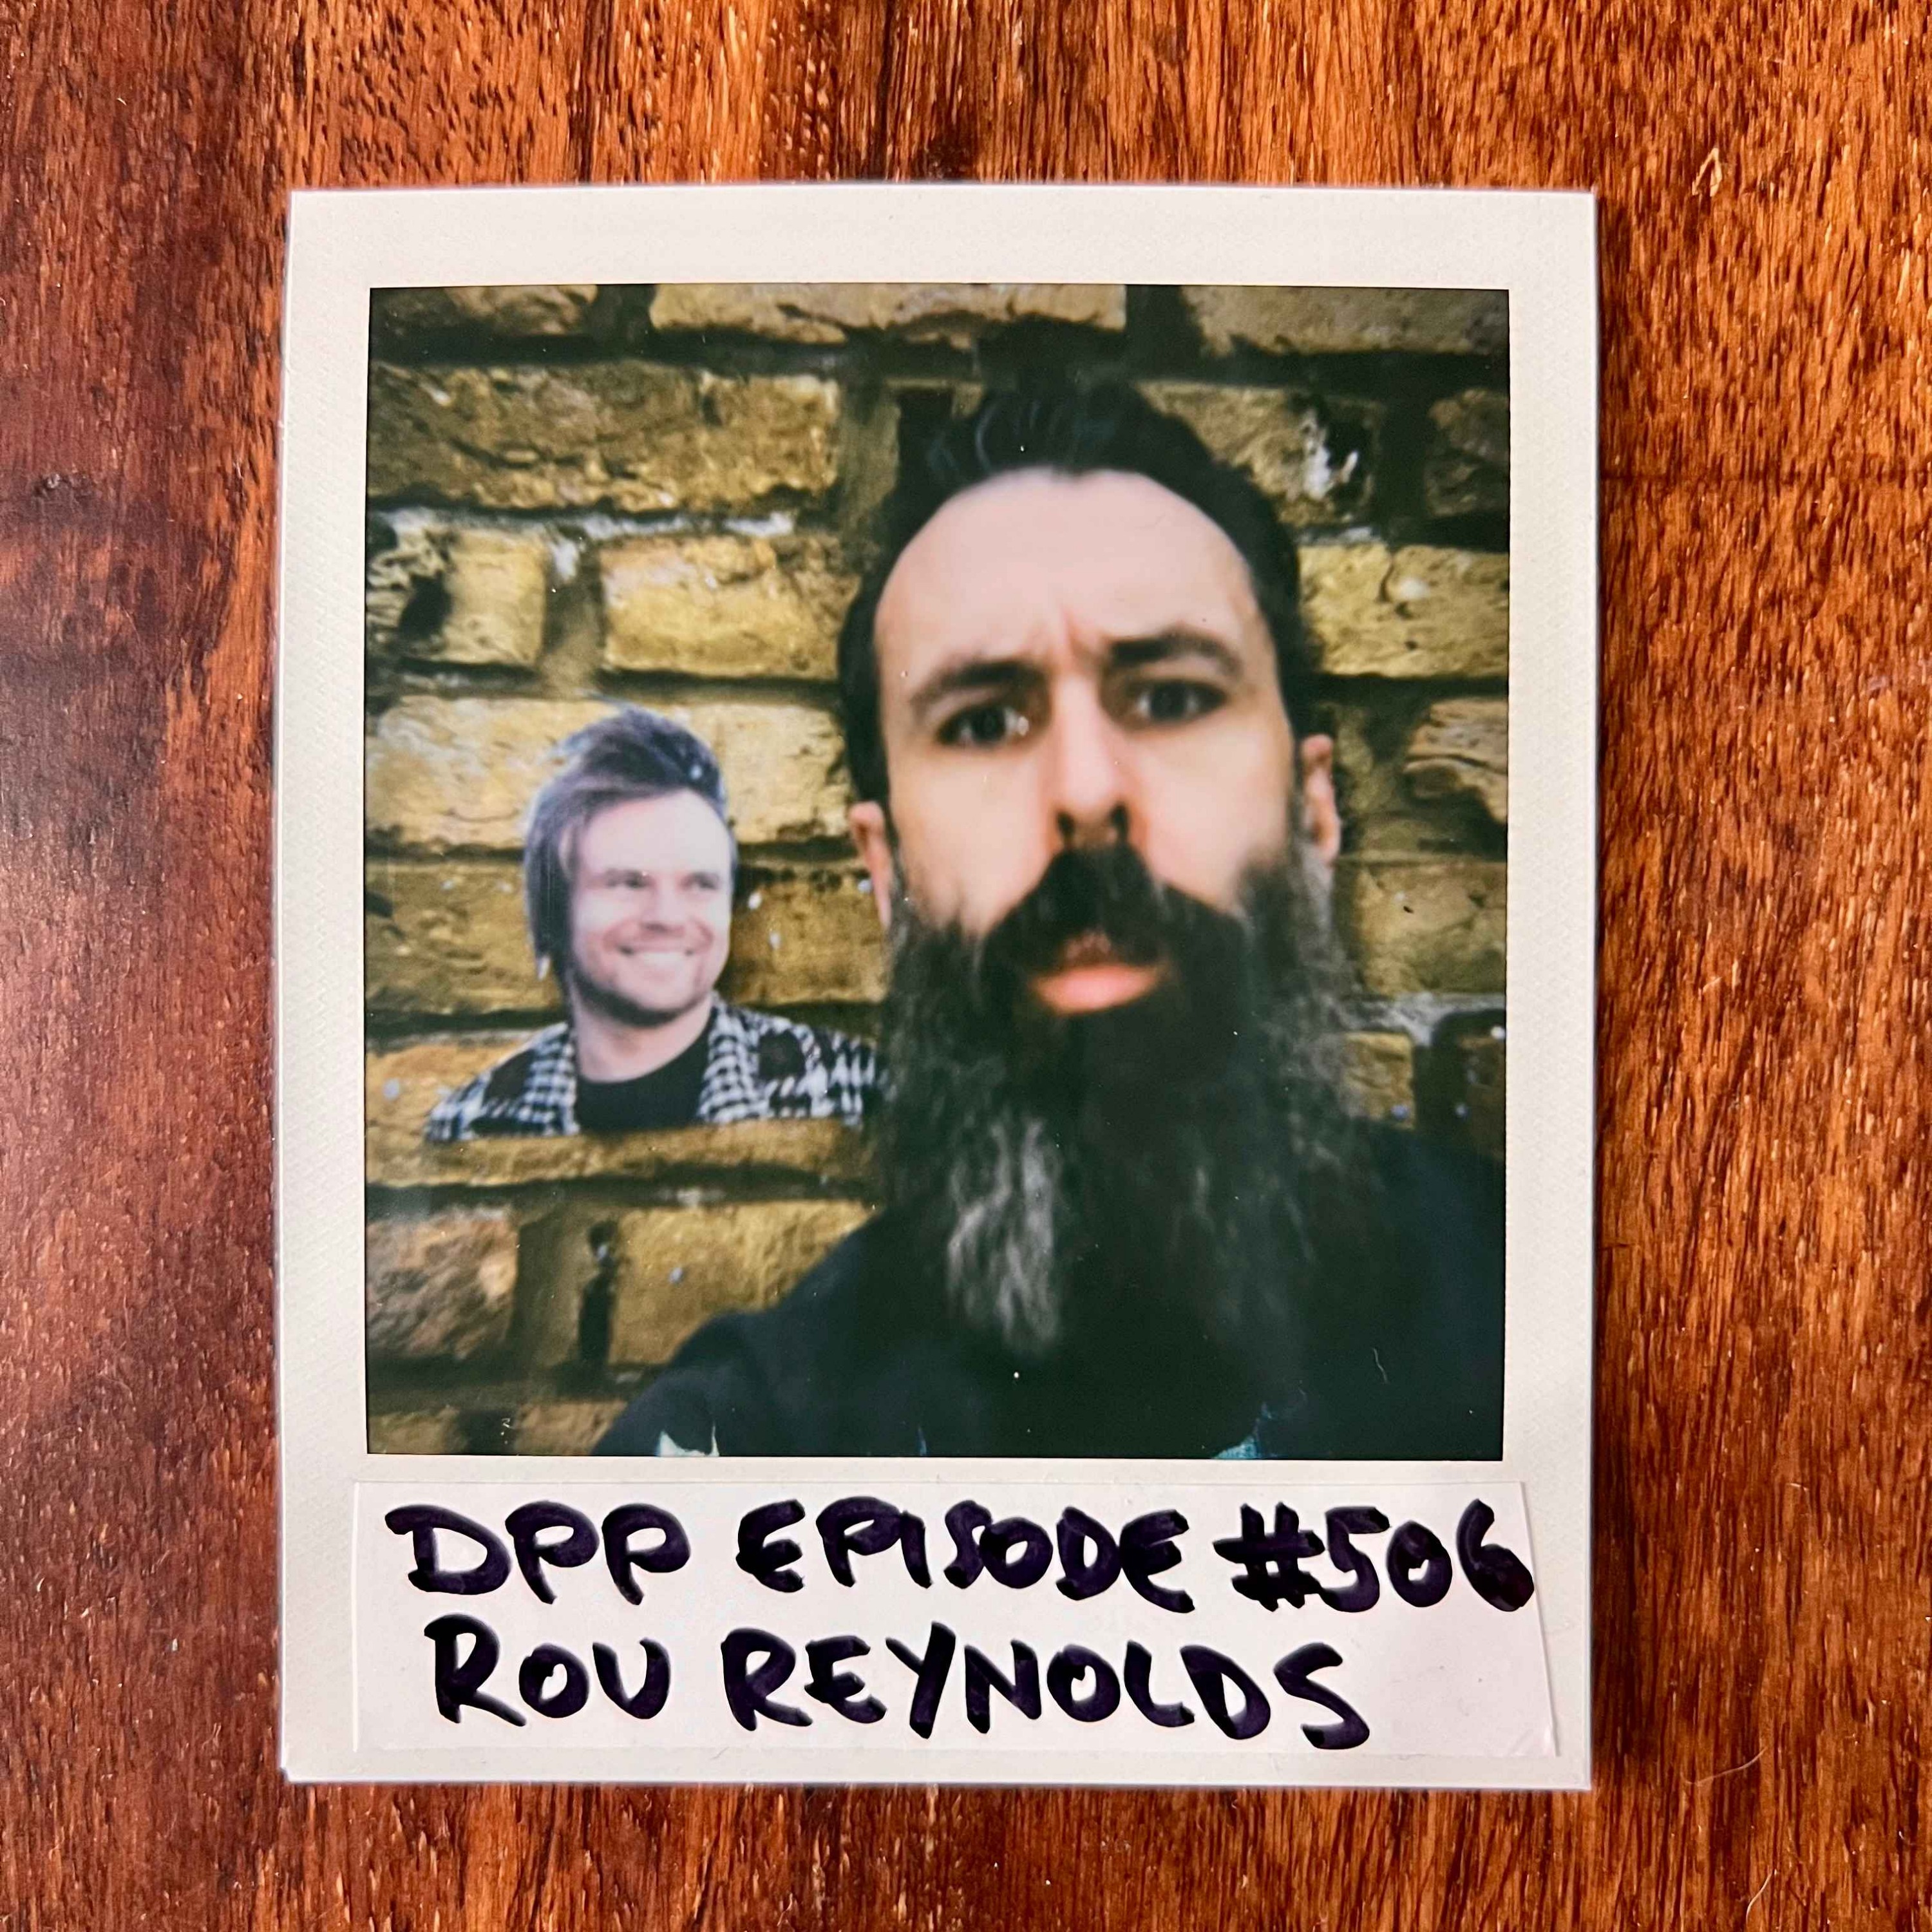 Rou Reynolds • Distraction Pieces Podcast with Scroobius Pip #506